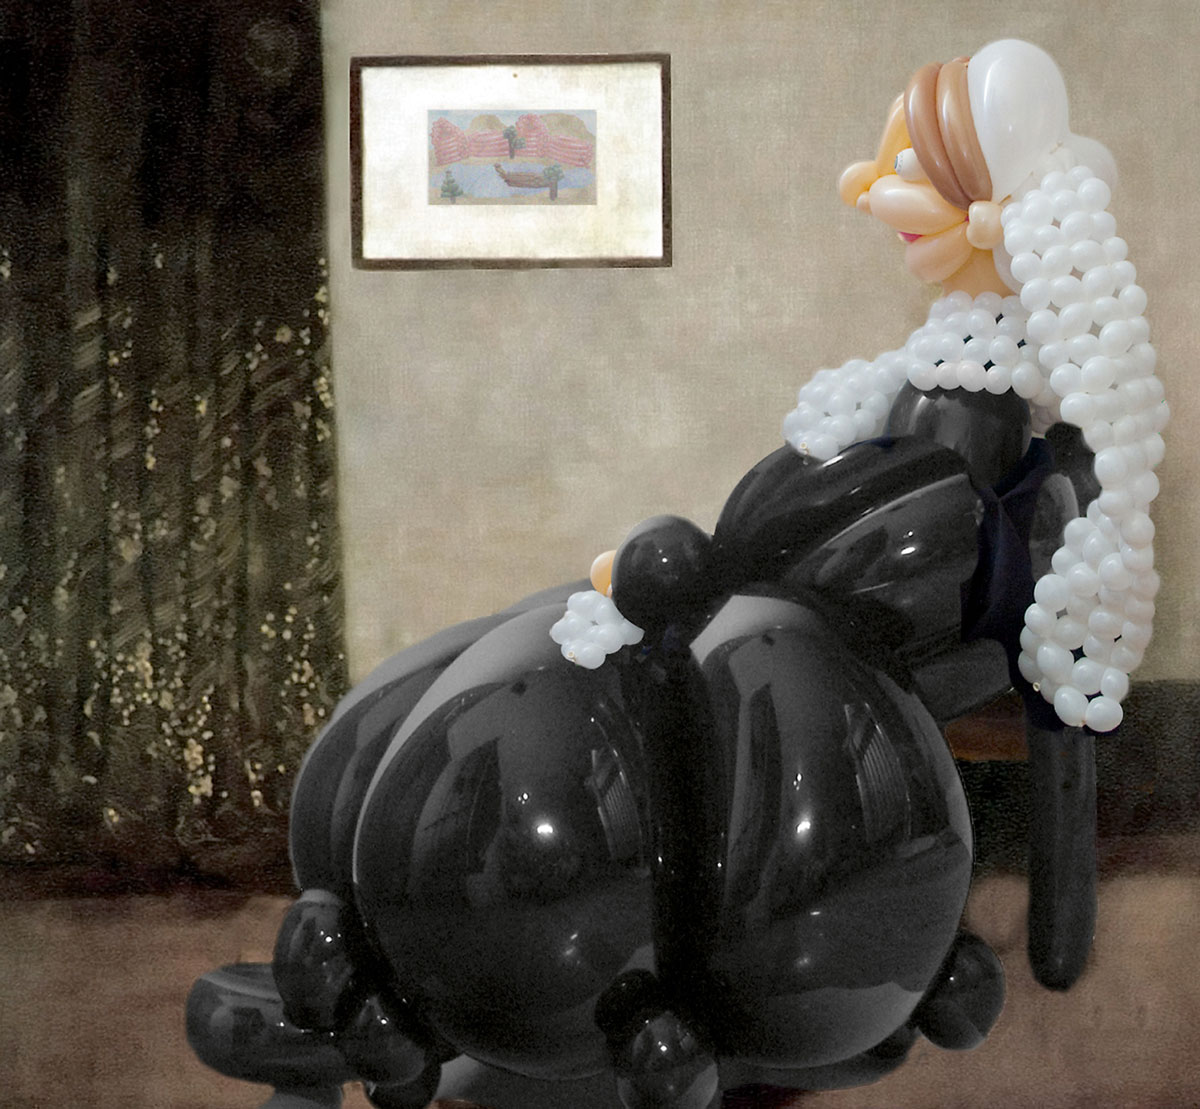 A photograph of Larry Moss’s balloon version of James McNeill Whistler’s Mother.